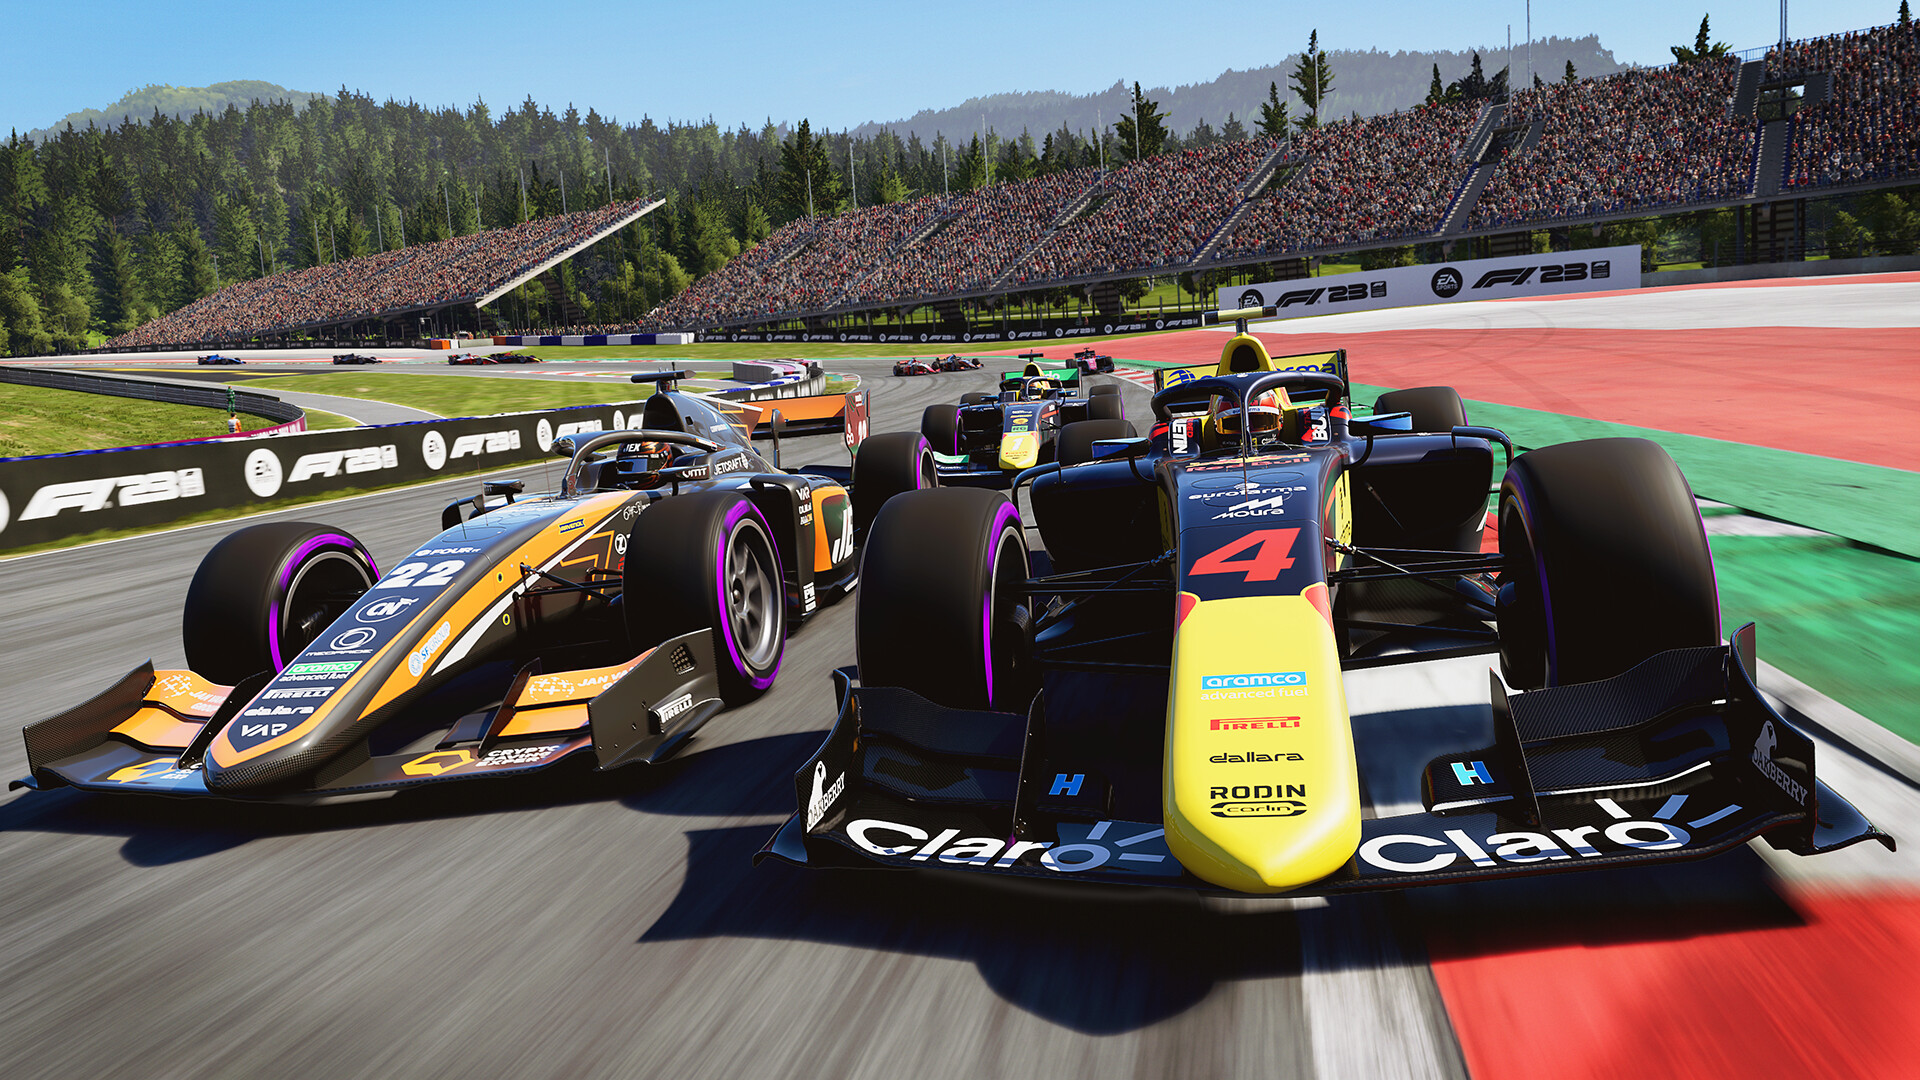 F1 23 brings all the drivers and circuits from the 2023 season of the category